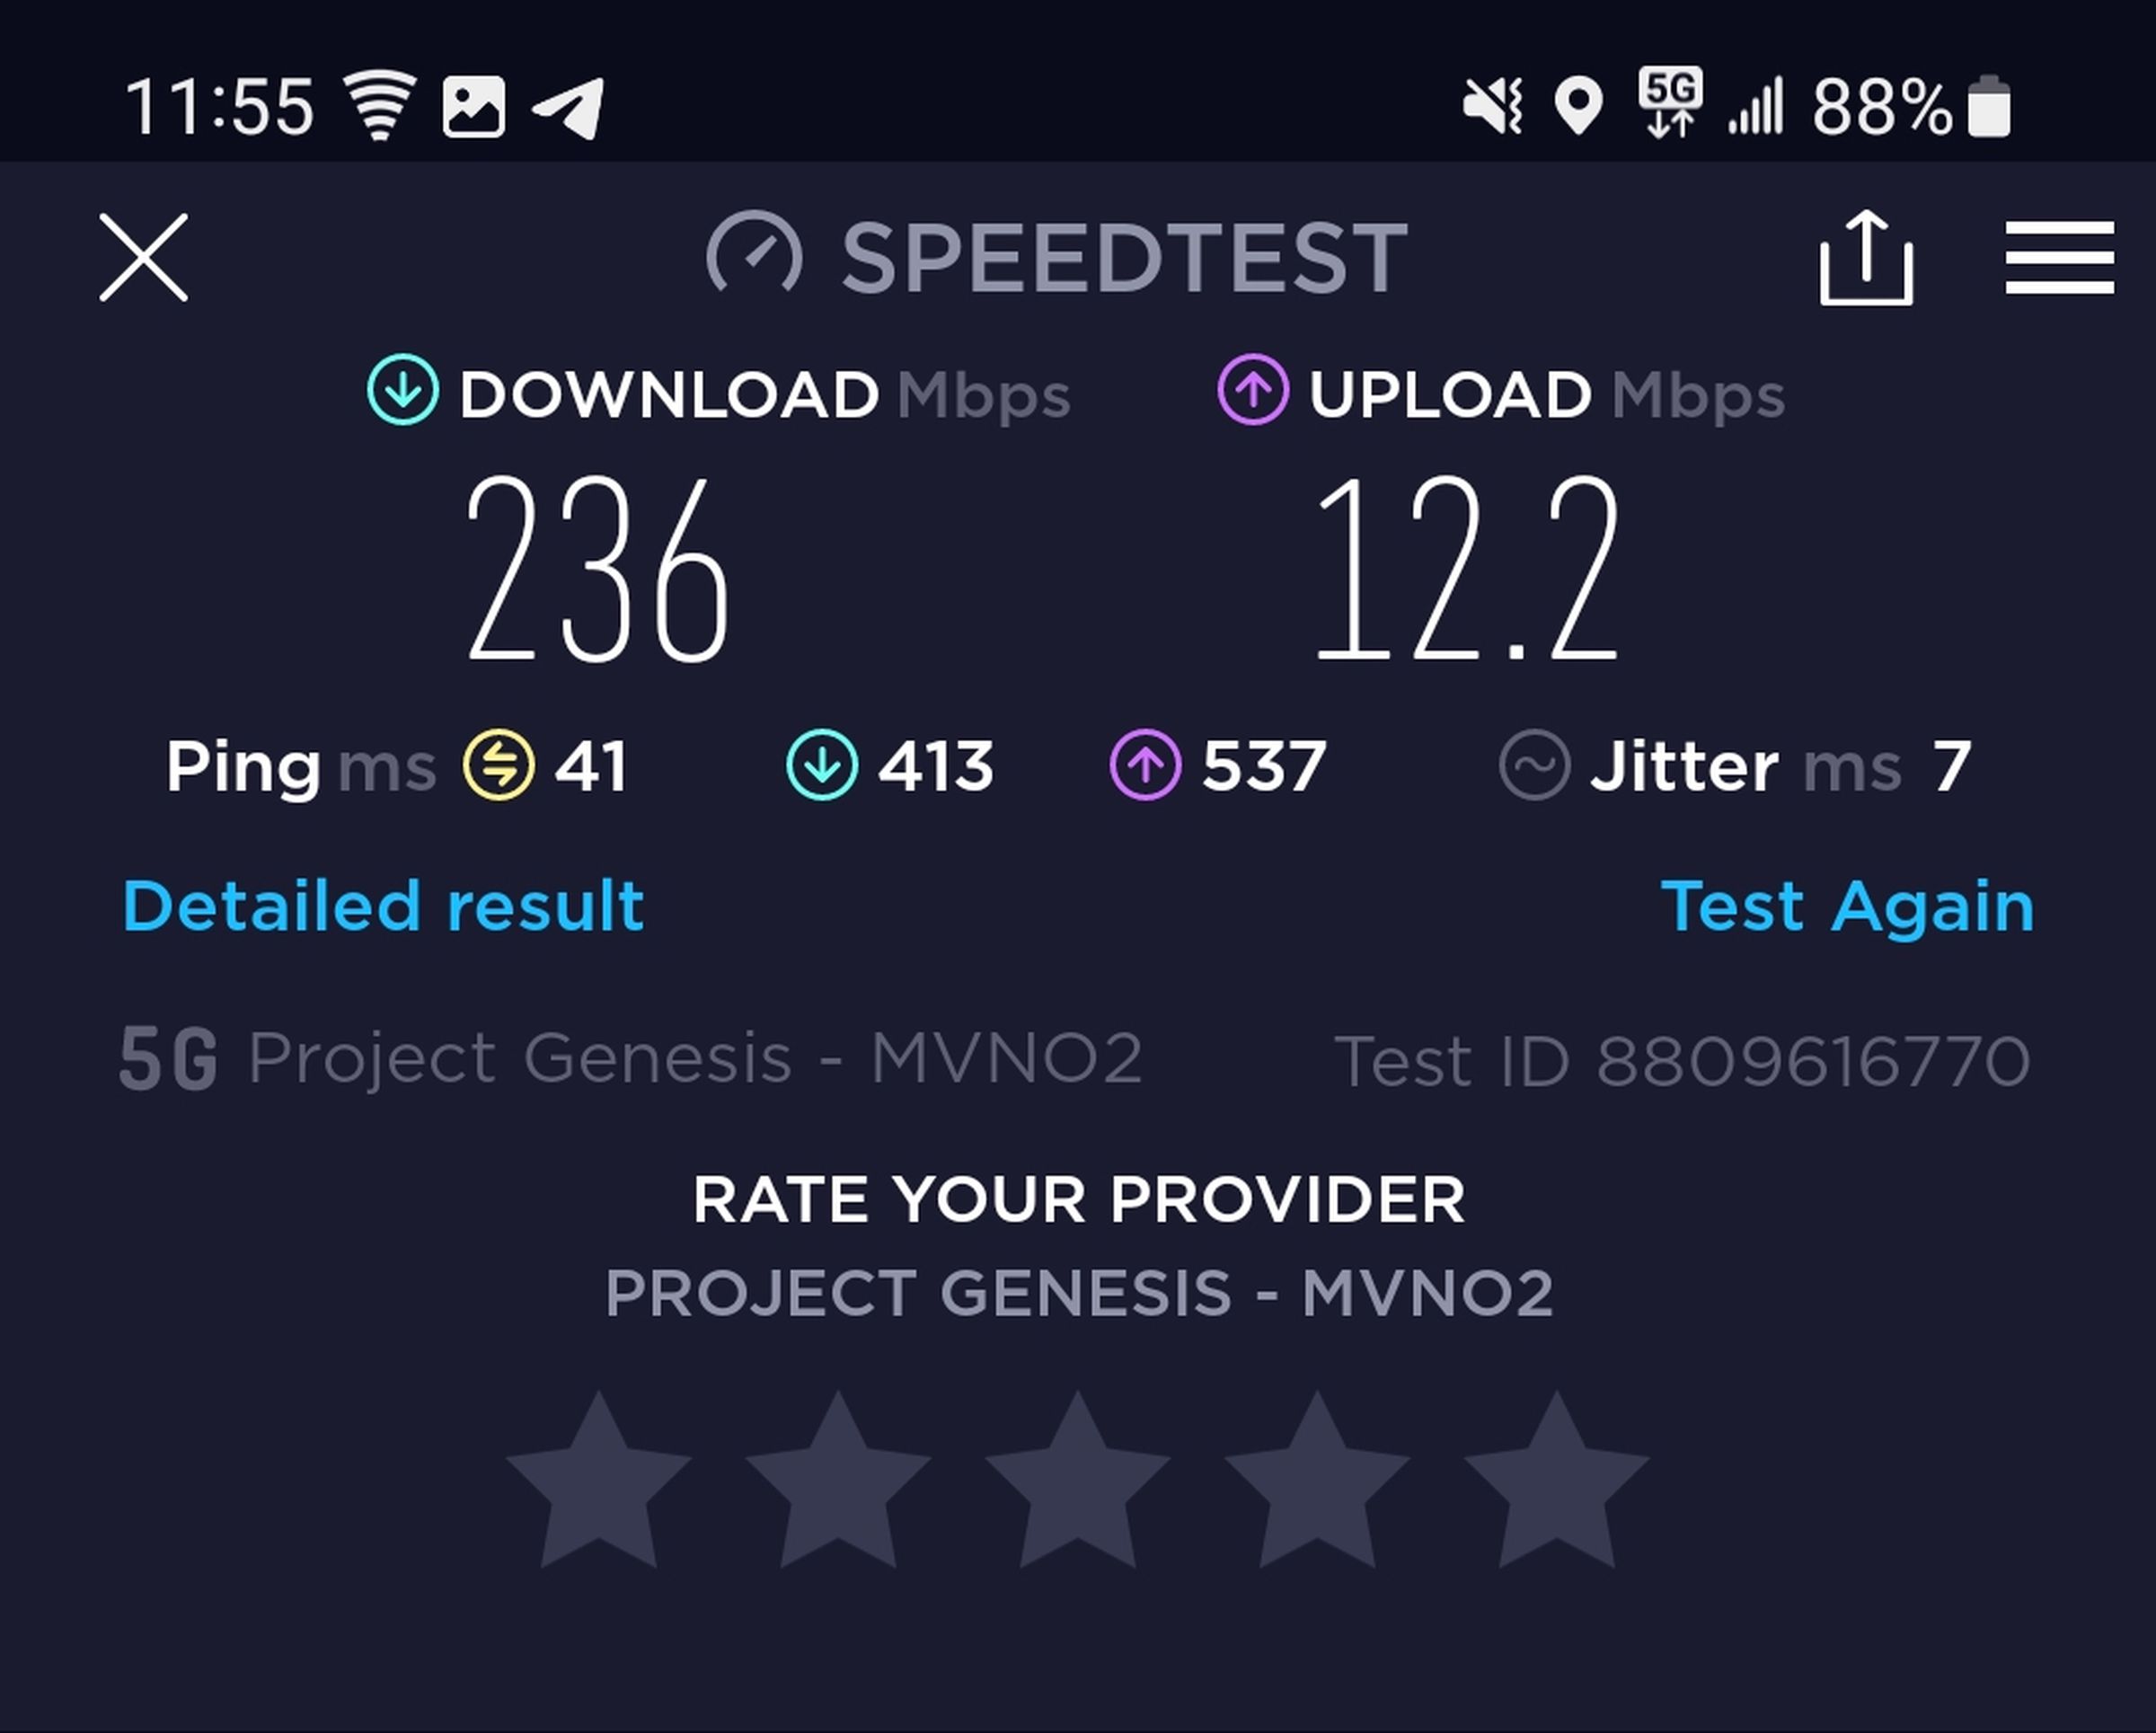 Screenshot of test results for 236 Mbps download speed and 12.2 Mbps upload speed.